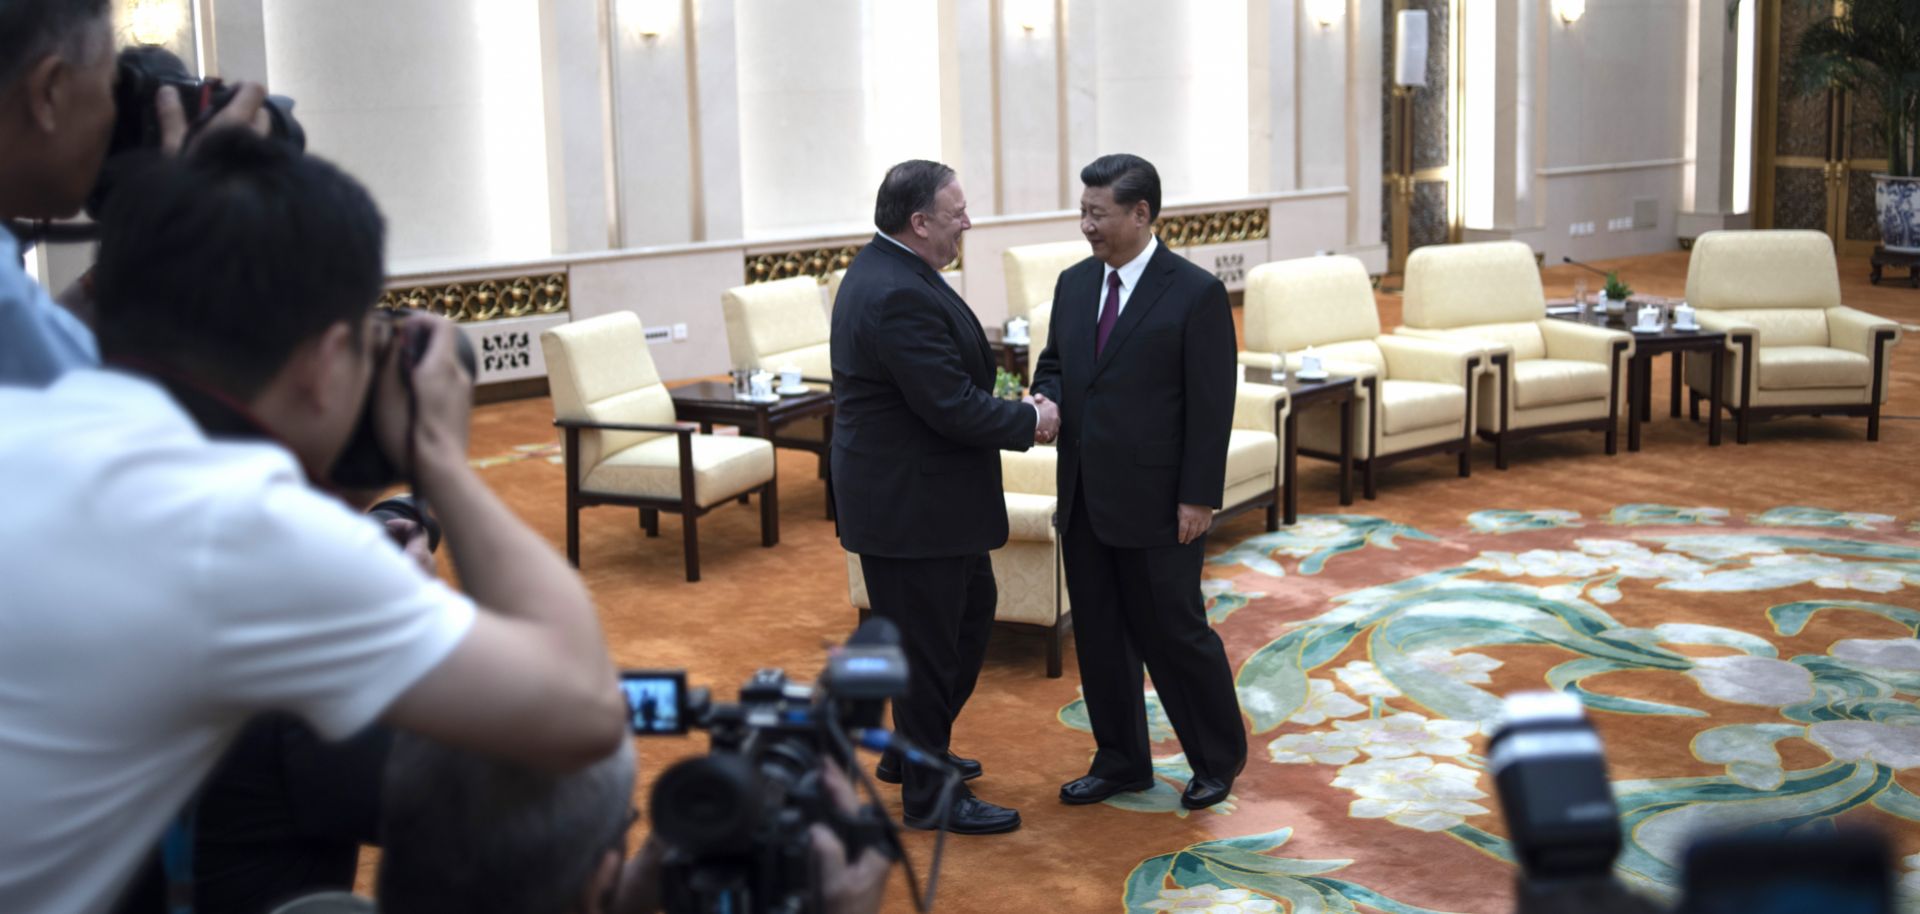 U.S. Secretary of State Mike Pompeo (L) shakes hands with Chinese President Xi Jinping during a meeting at the Great Hall of the People on June 14 in Beijing.